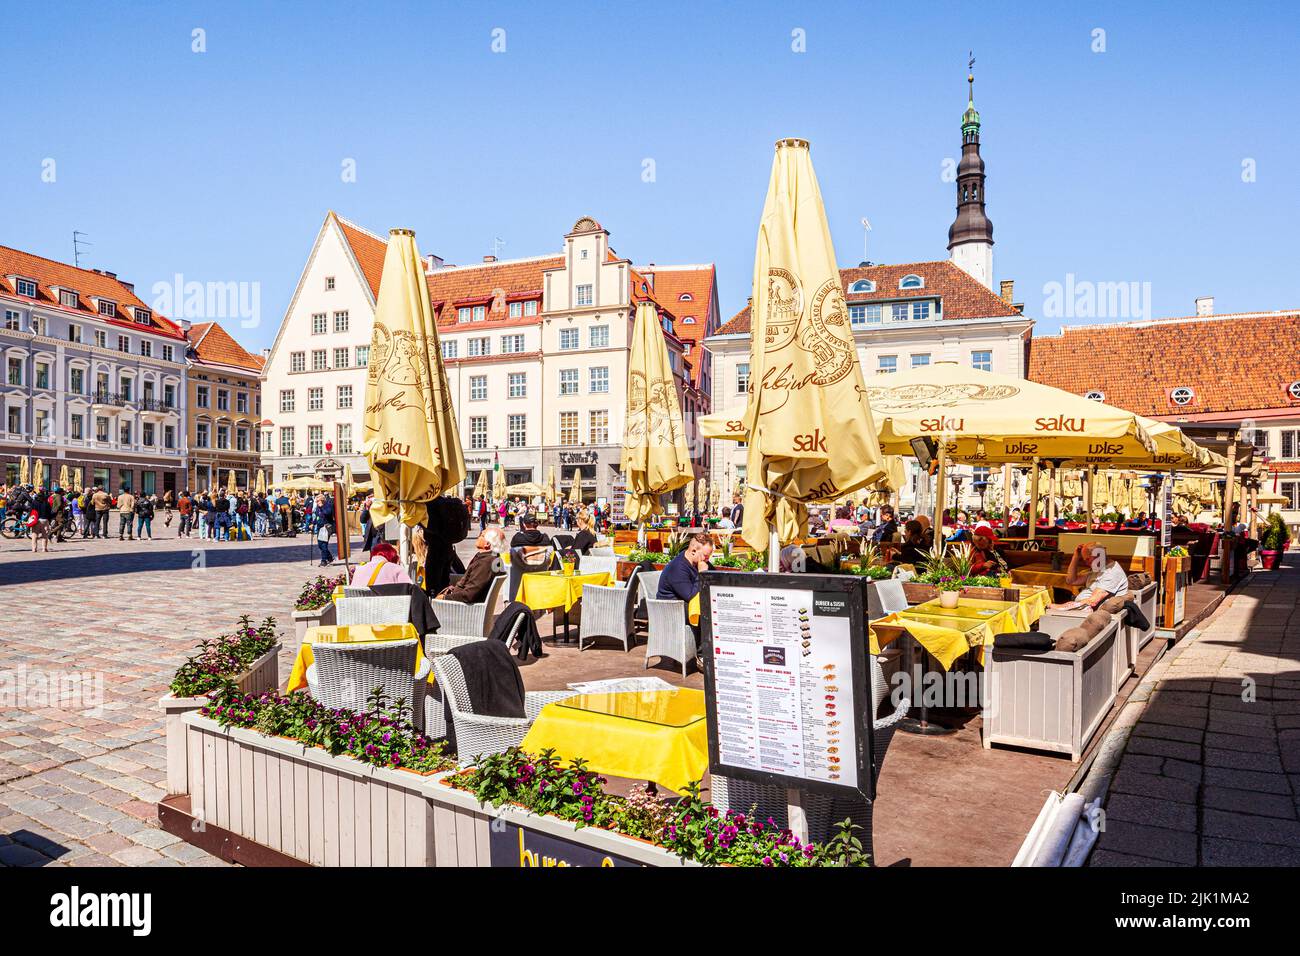 A cafe in the bustling Town Hall Square in the Old Town of Tallinn the capital city of Estonia Stock Photo